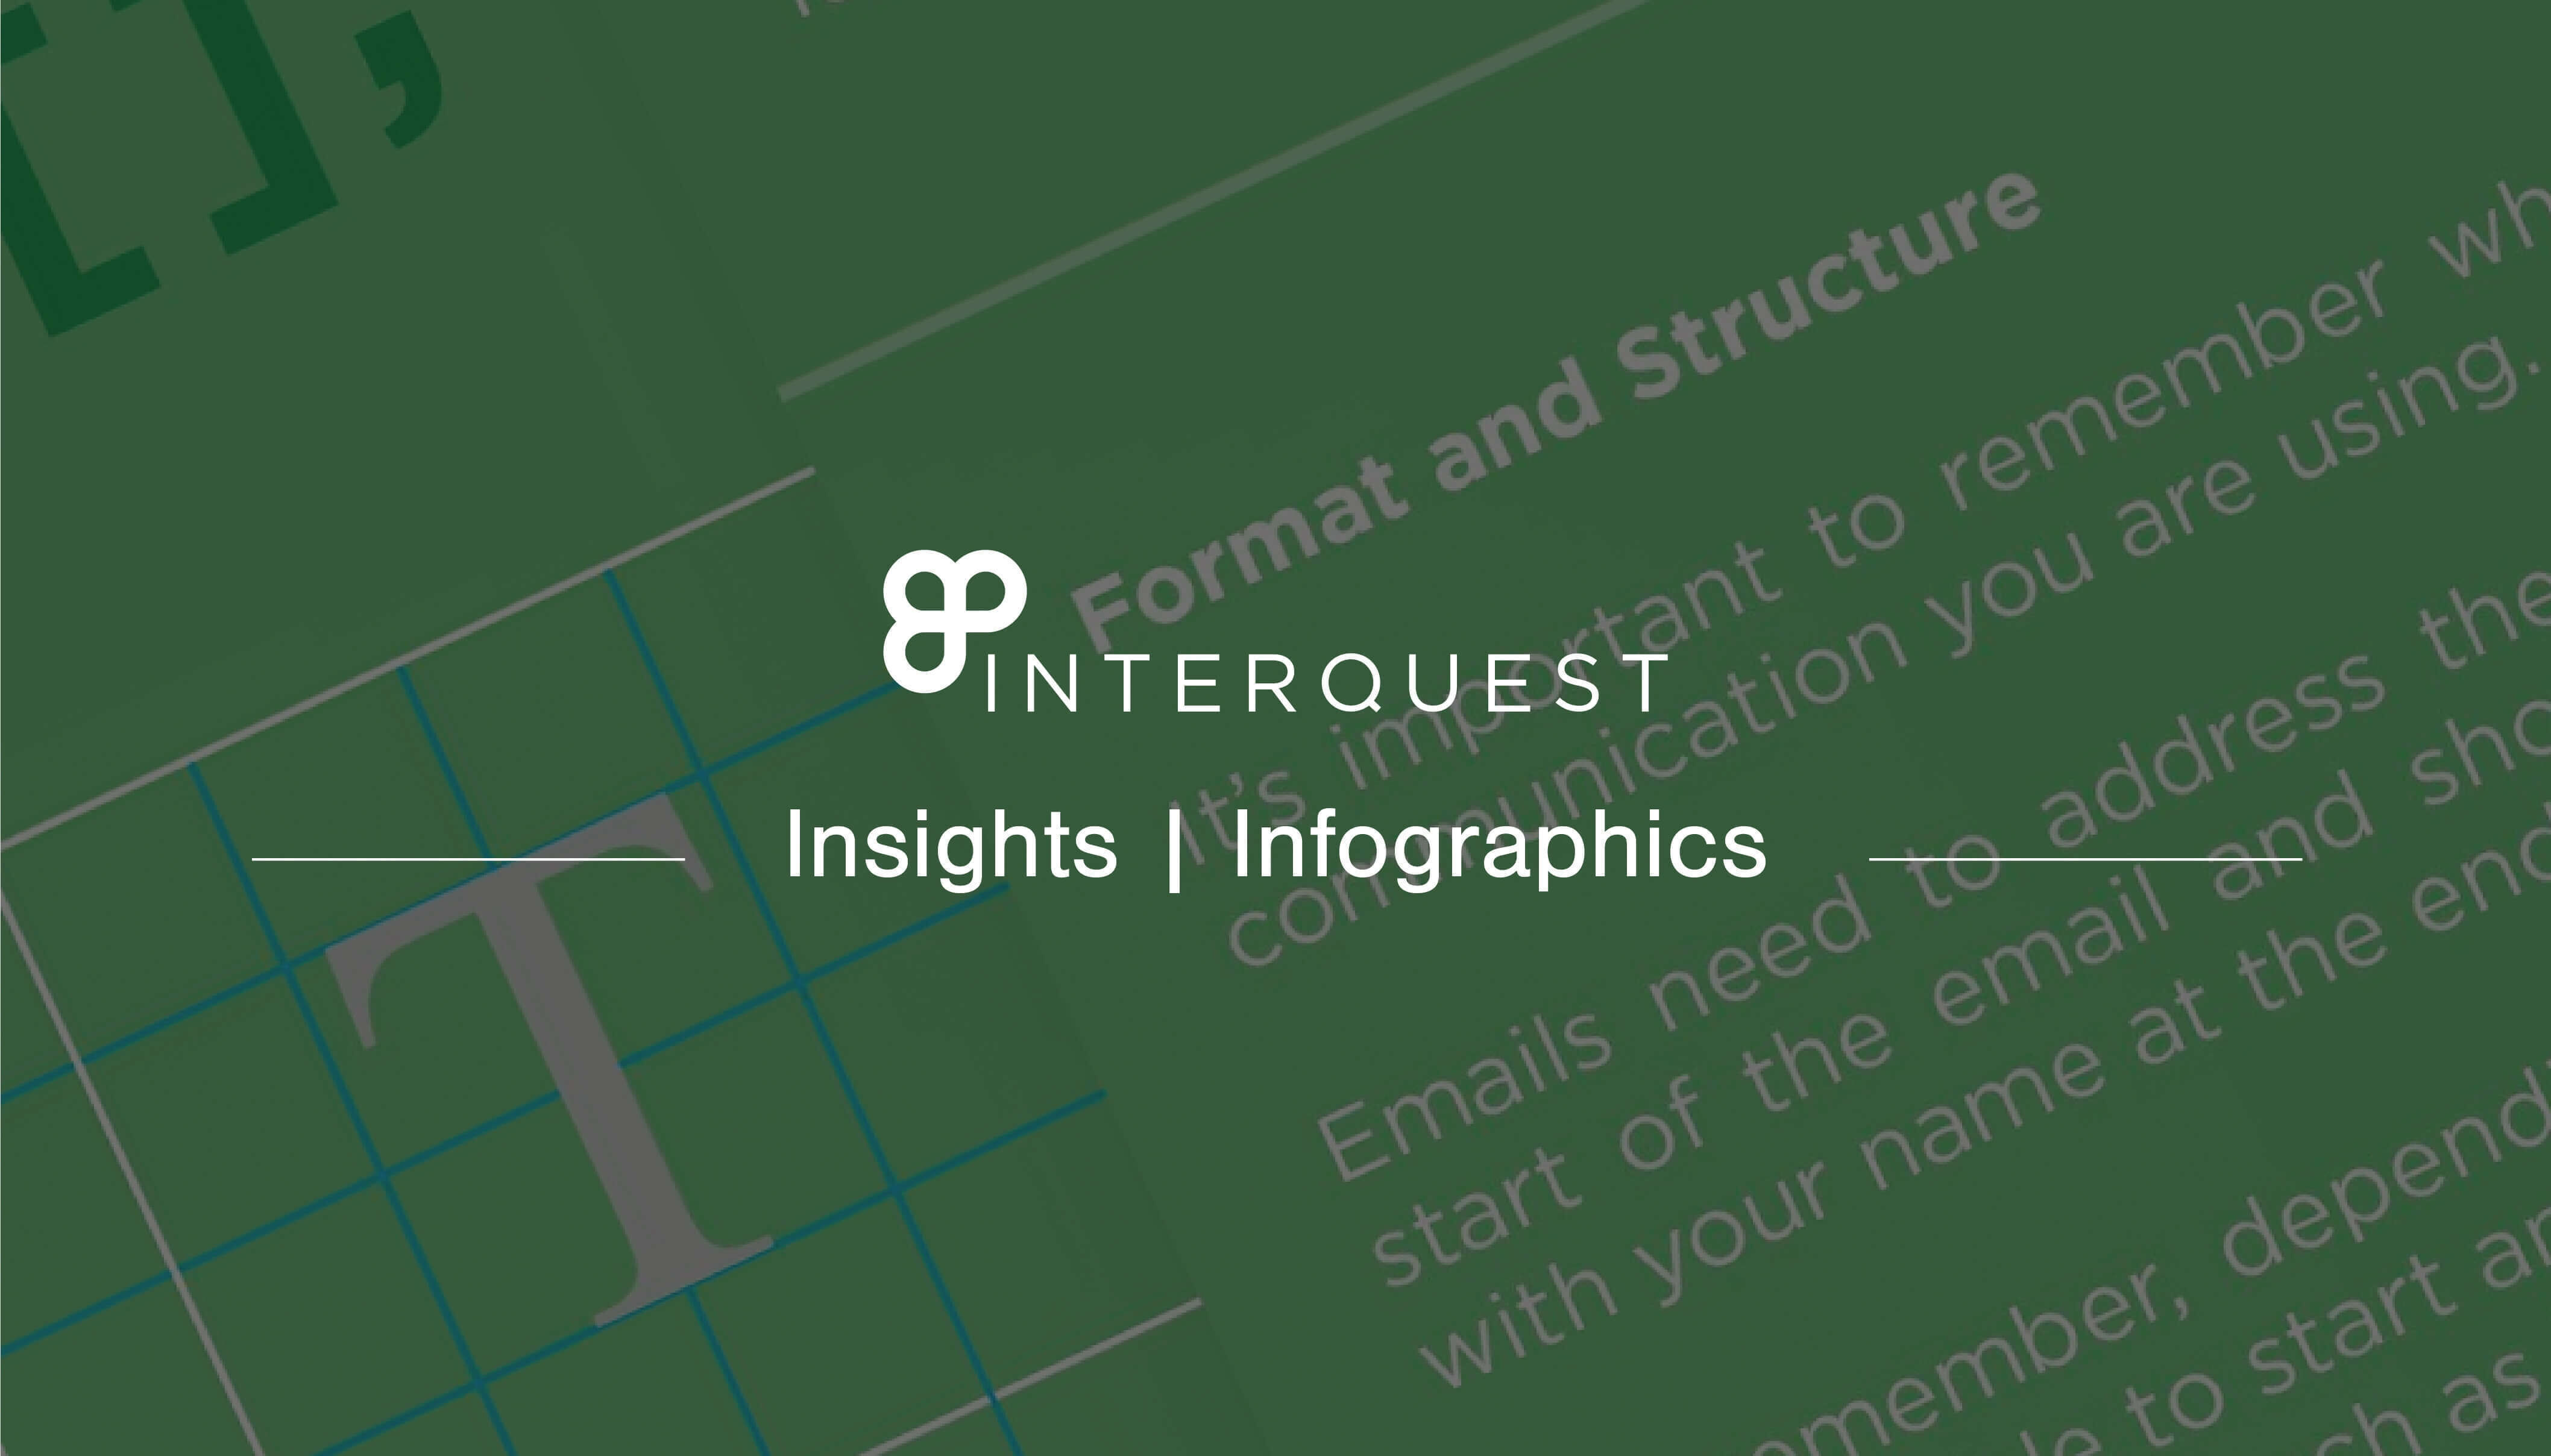 Inter Quest Insights Infographics banner